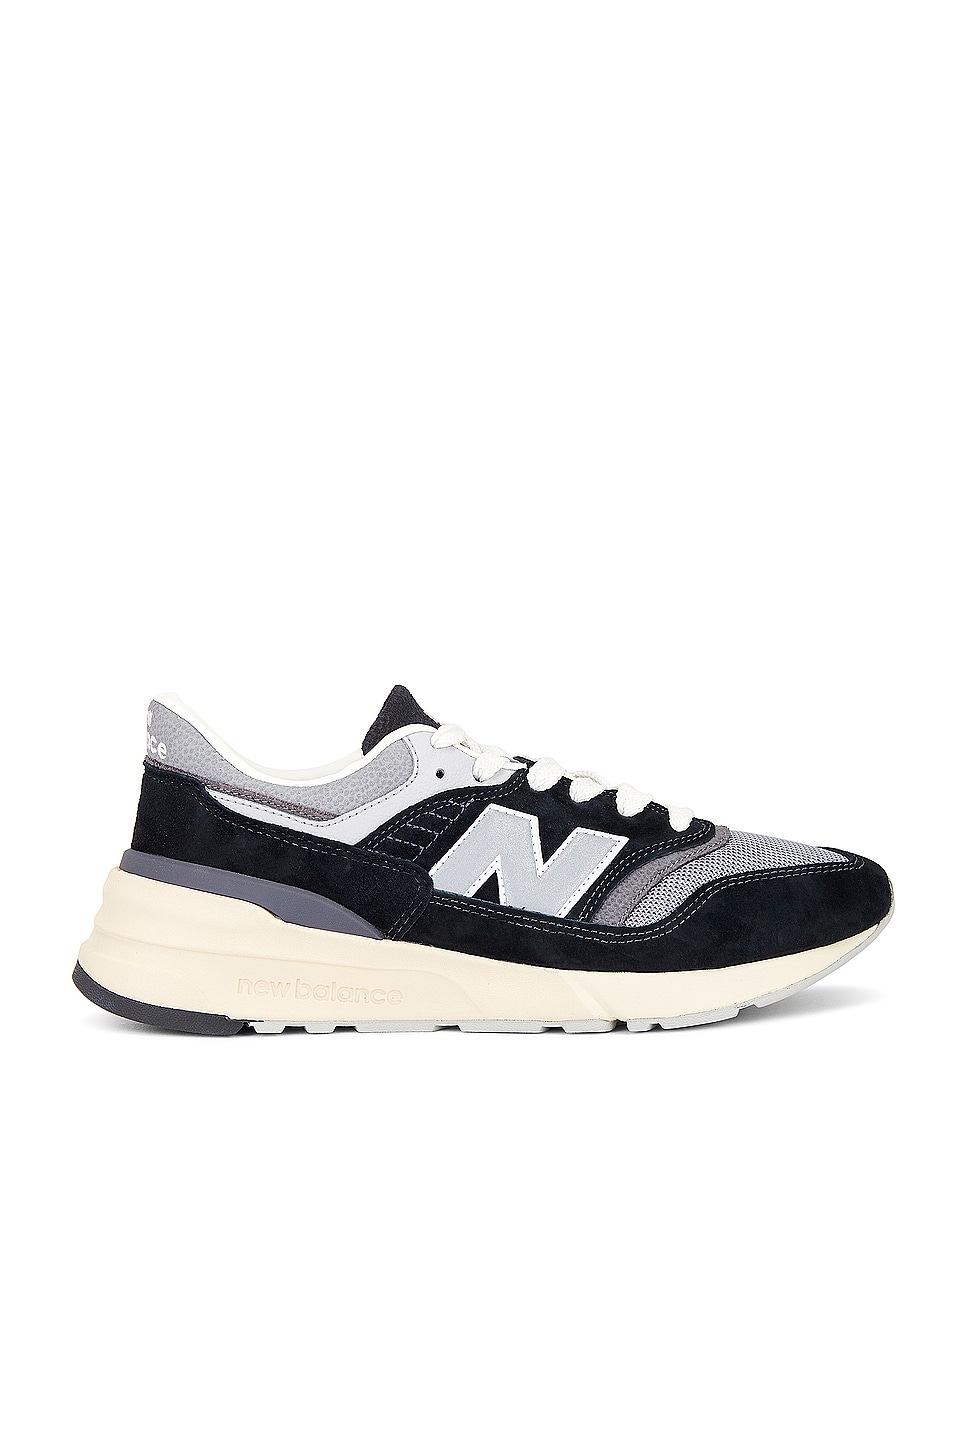 Image 1 of New Balance 997R in Black & Shadow Grey